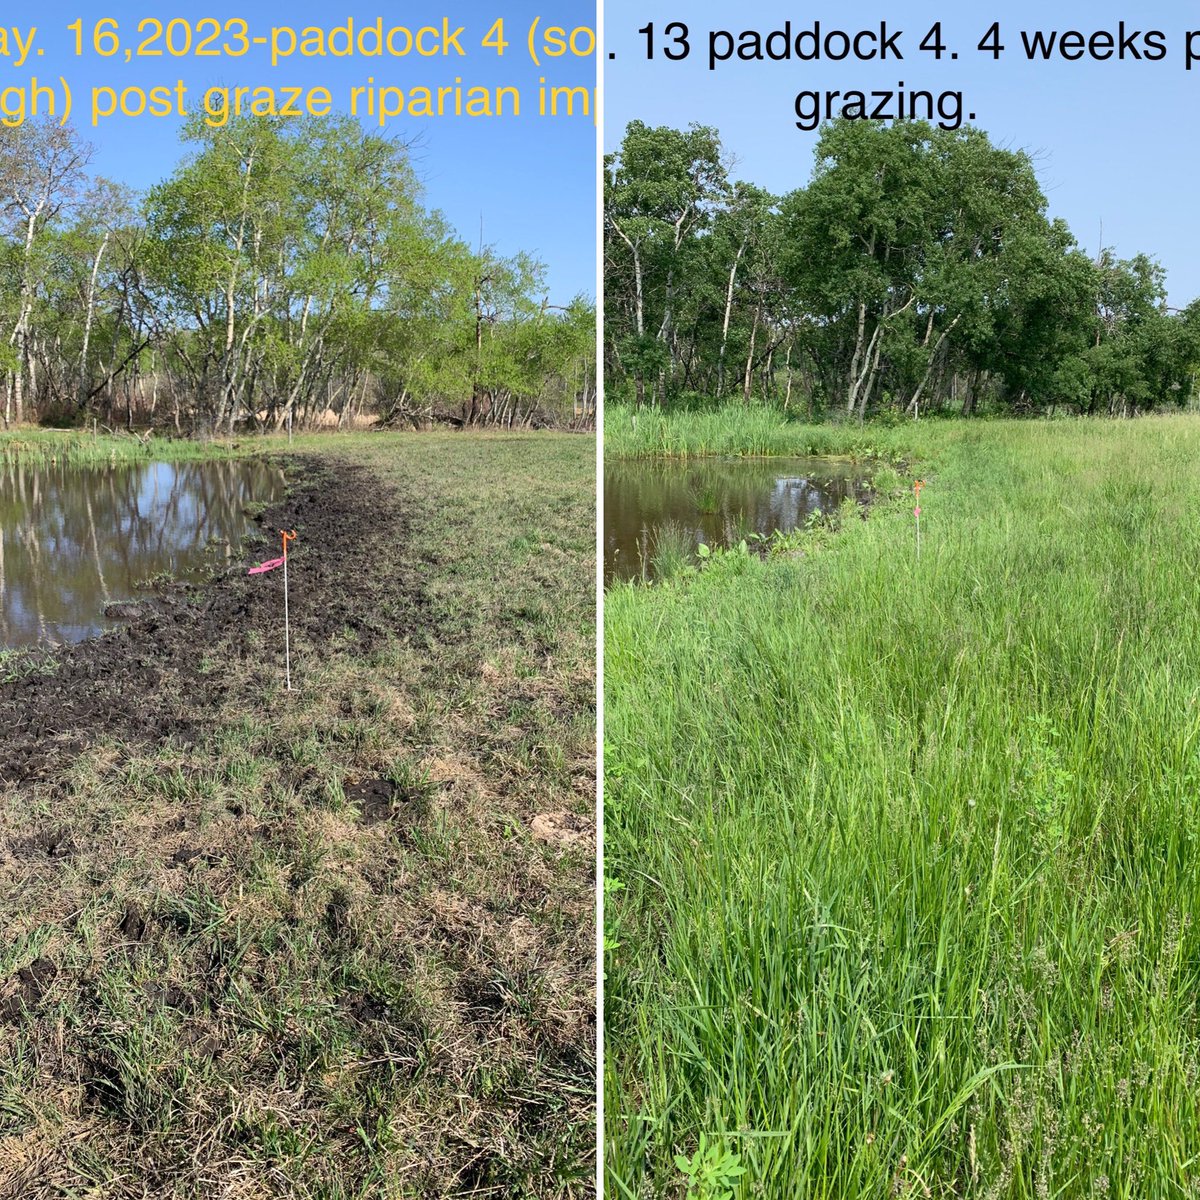 📚 The results are in…
Grazing cattle aren’t the environmental evil that some try to make them out to be. Here is what only 1 month of rest and recovery looks like after a grazing event🌱😍. *Note the step-in post, in both pics for reference* #restandrecovery #naturalsystems